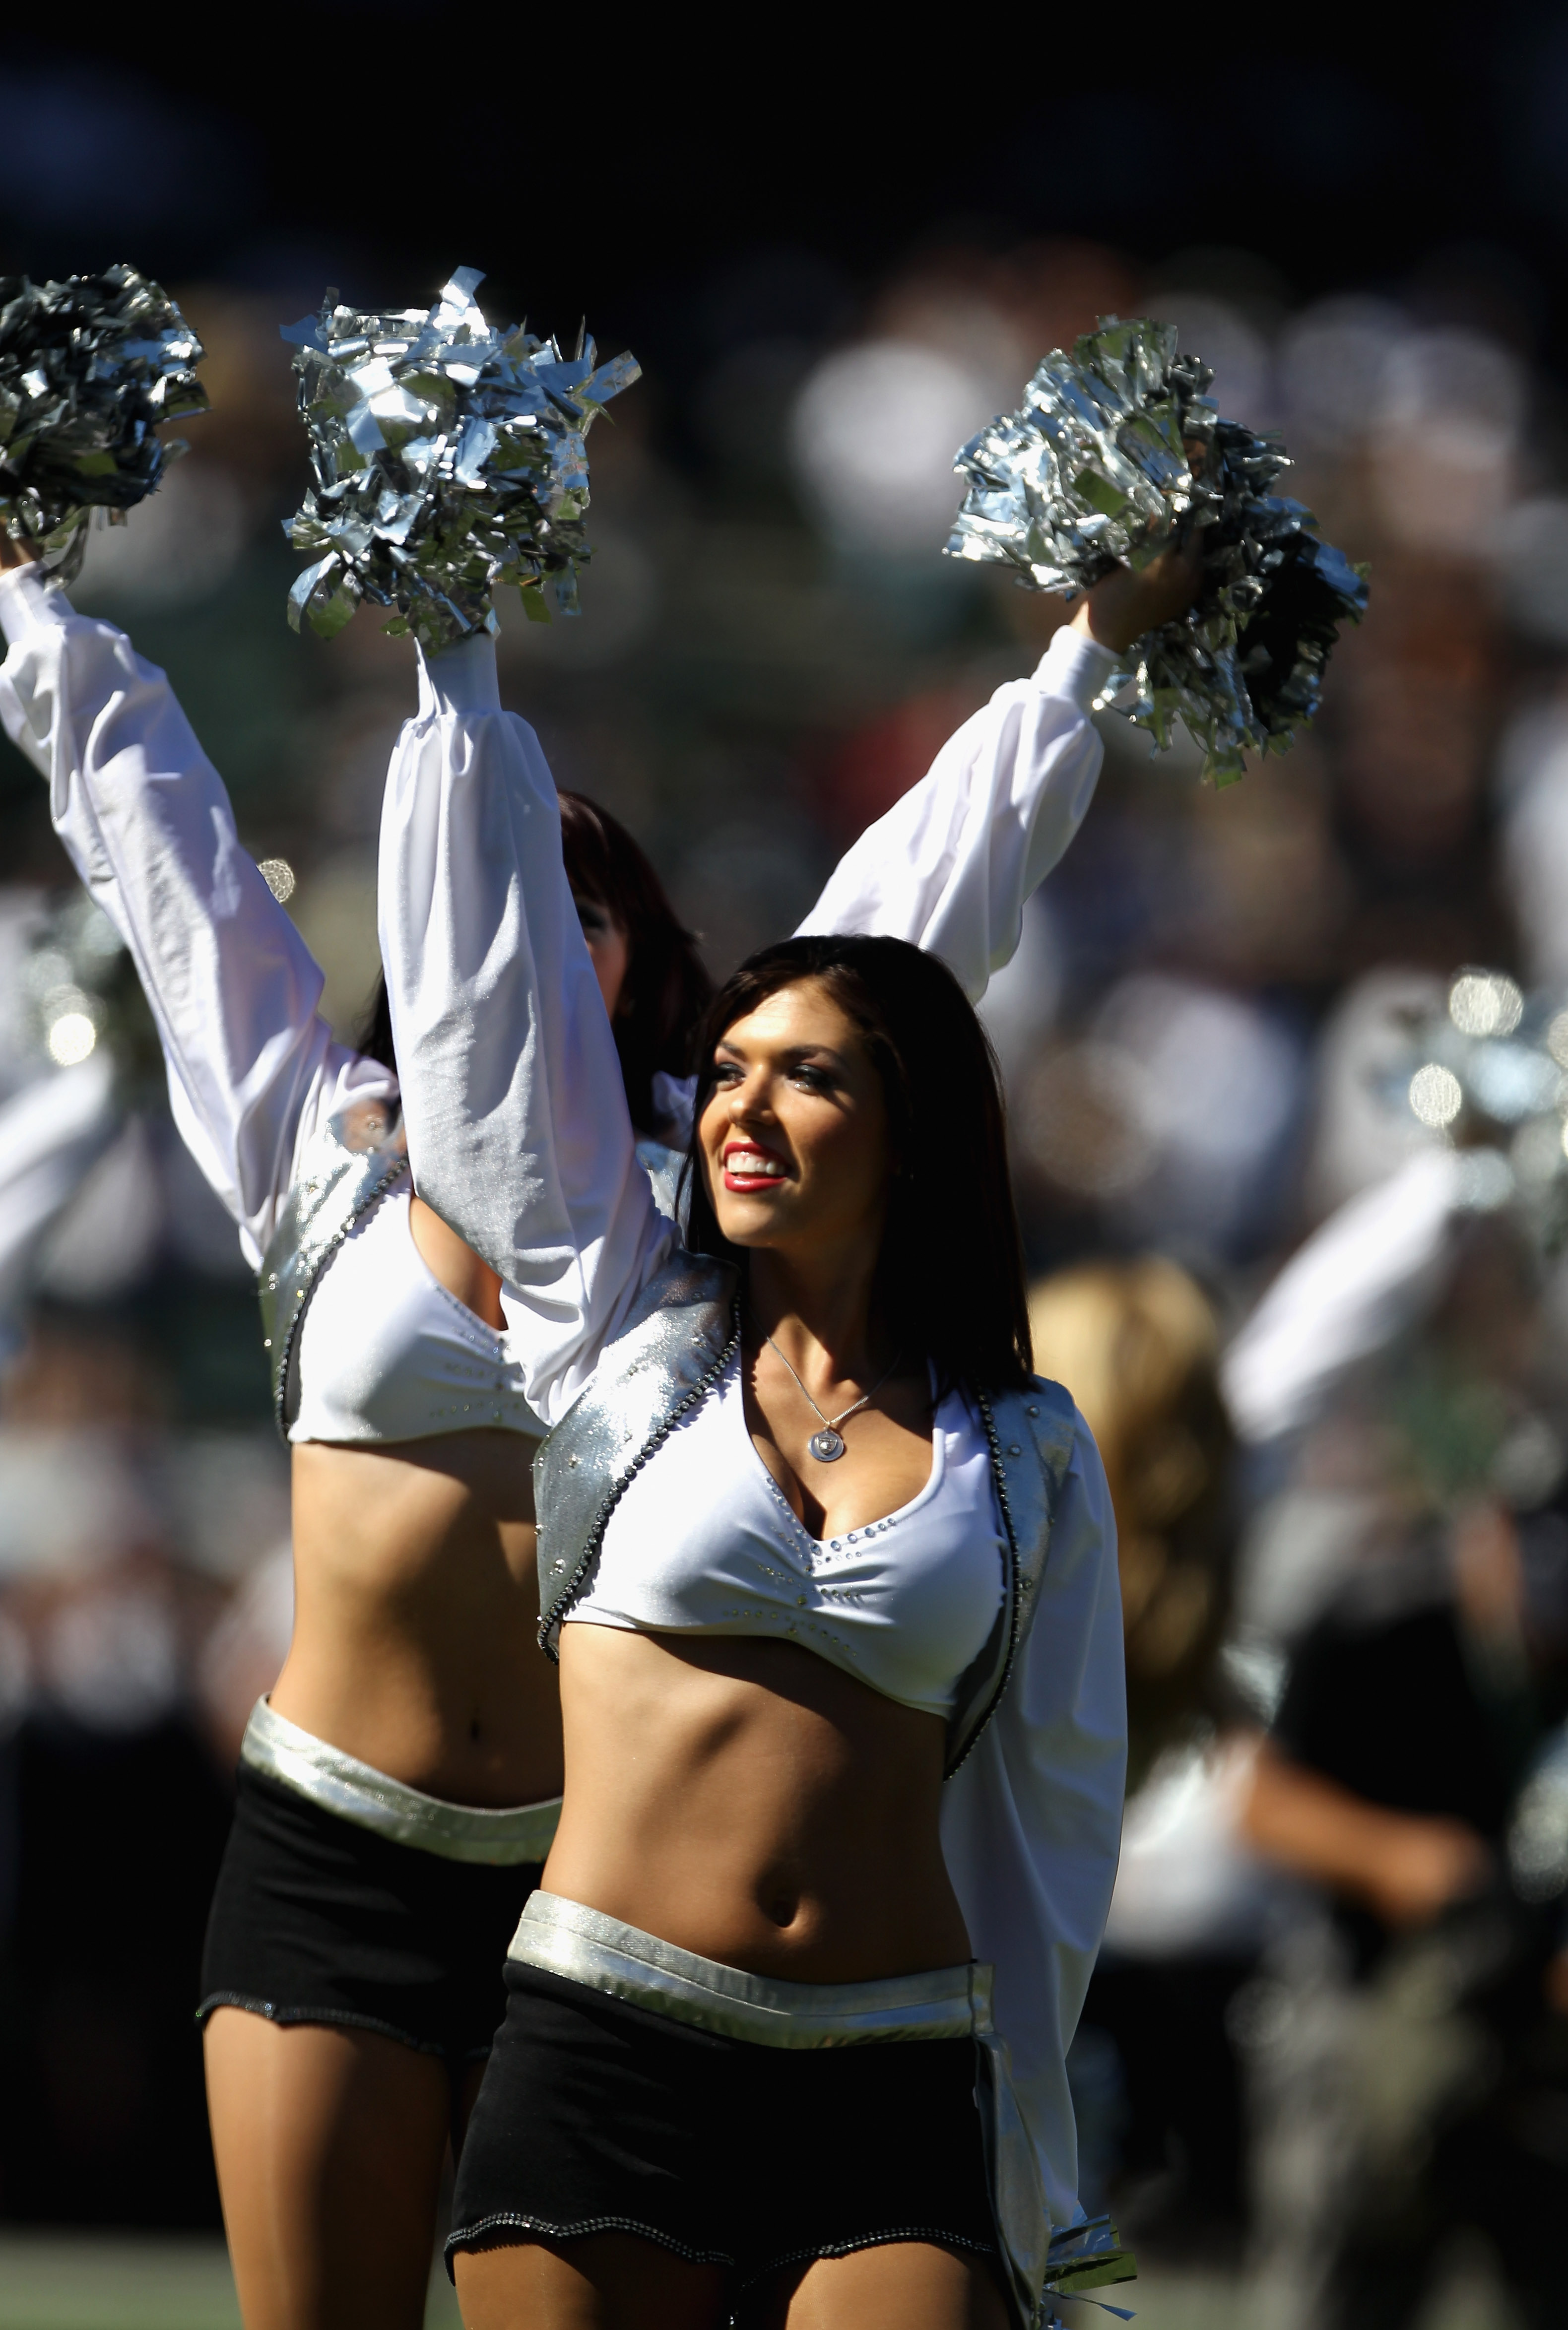 OAKLAND, CA - OCTOBER 10:  Oakland Raiders cheerleaders, the Raiderettes, cheer for their team during their game against the San Diego Chargers at Oakland-Alameda County Coliseum on October 10, 2010 in Oakland, California.  (Photo by Ezra Shaw/Getty Image